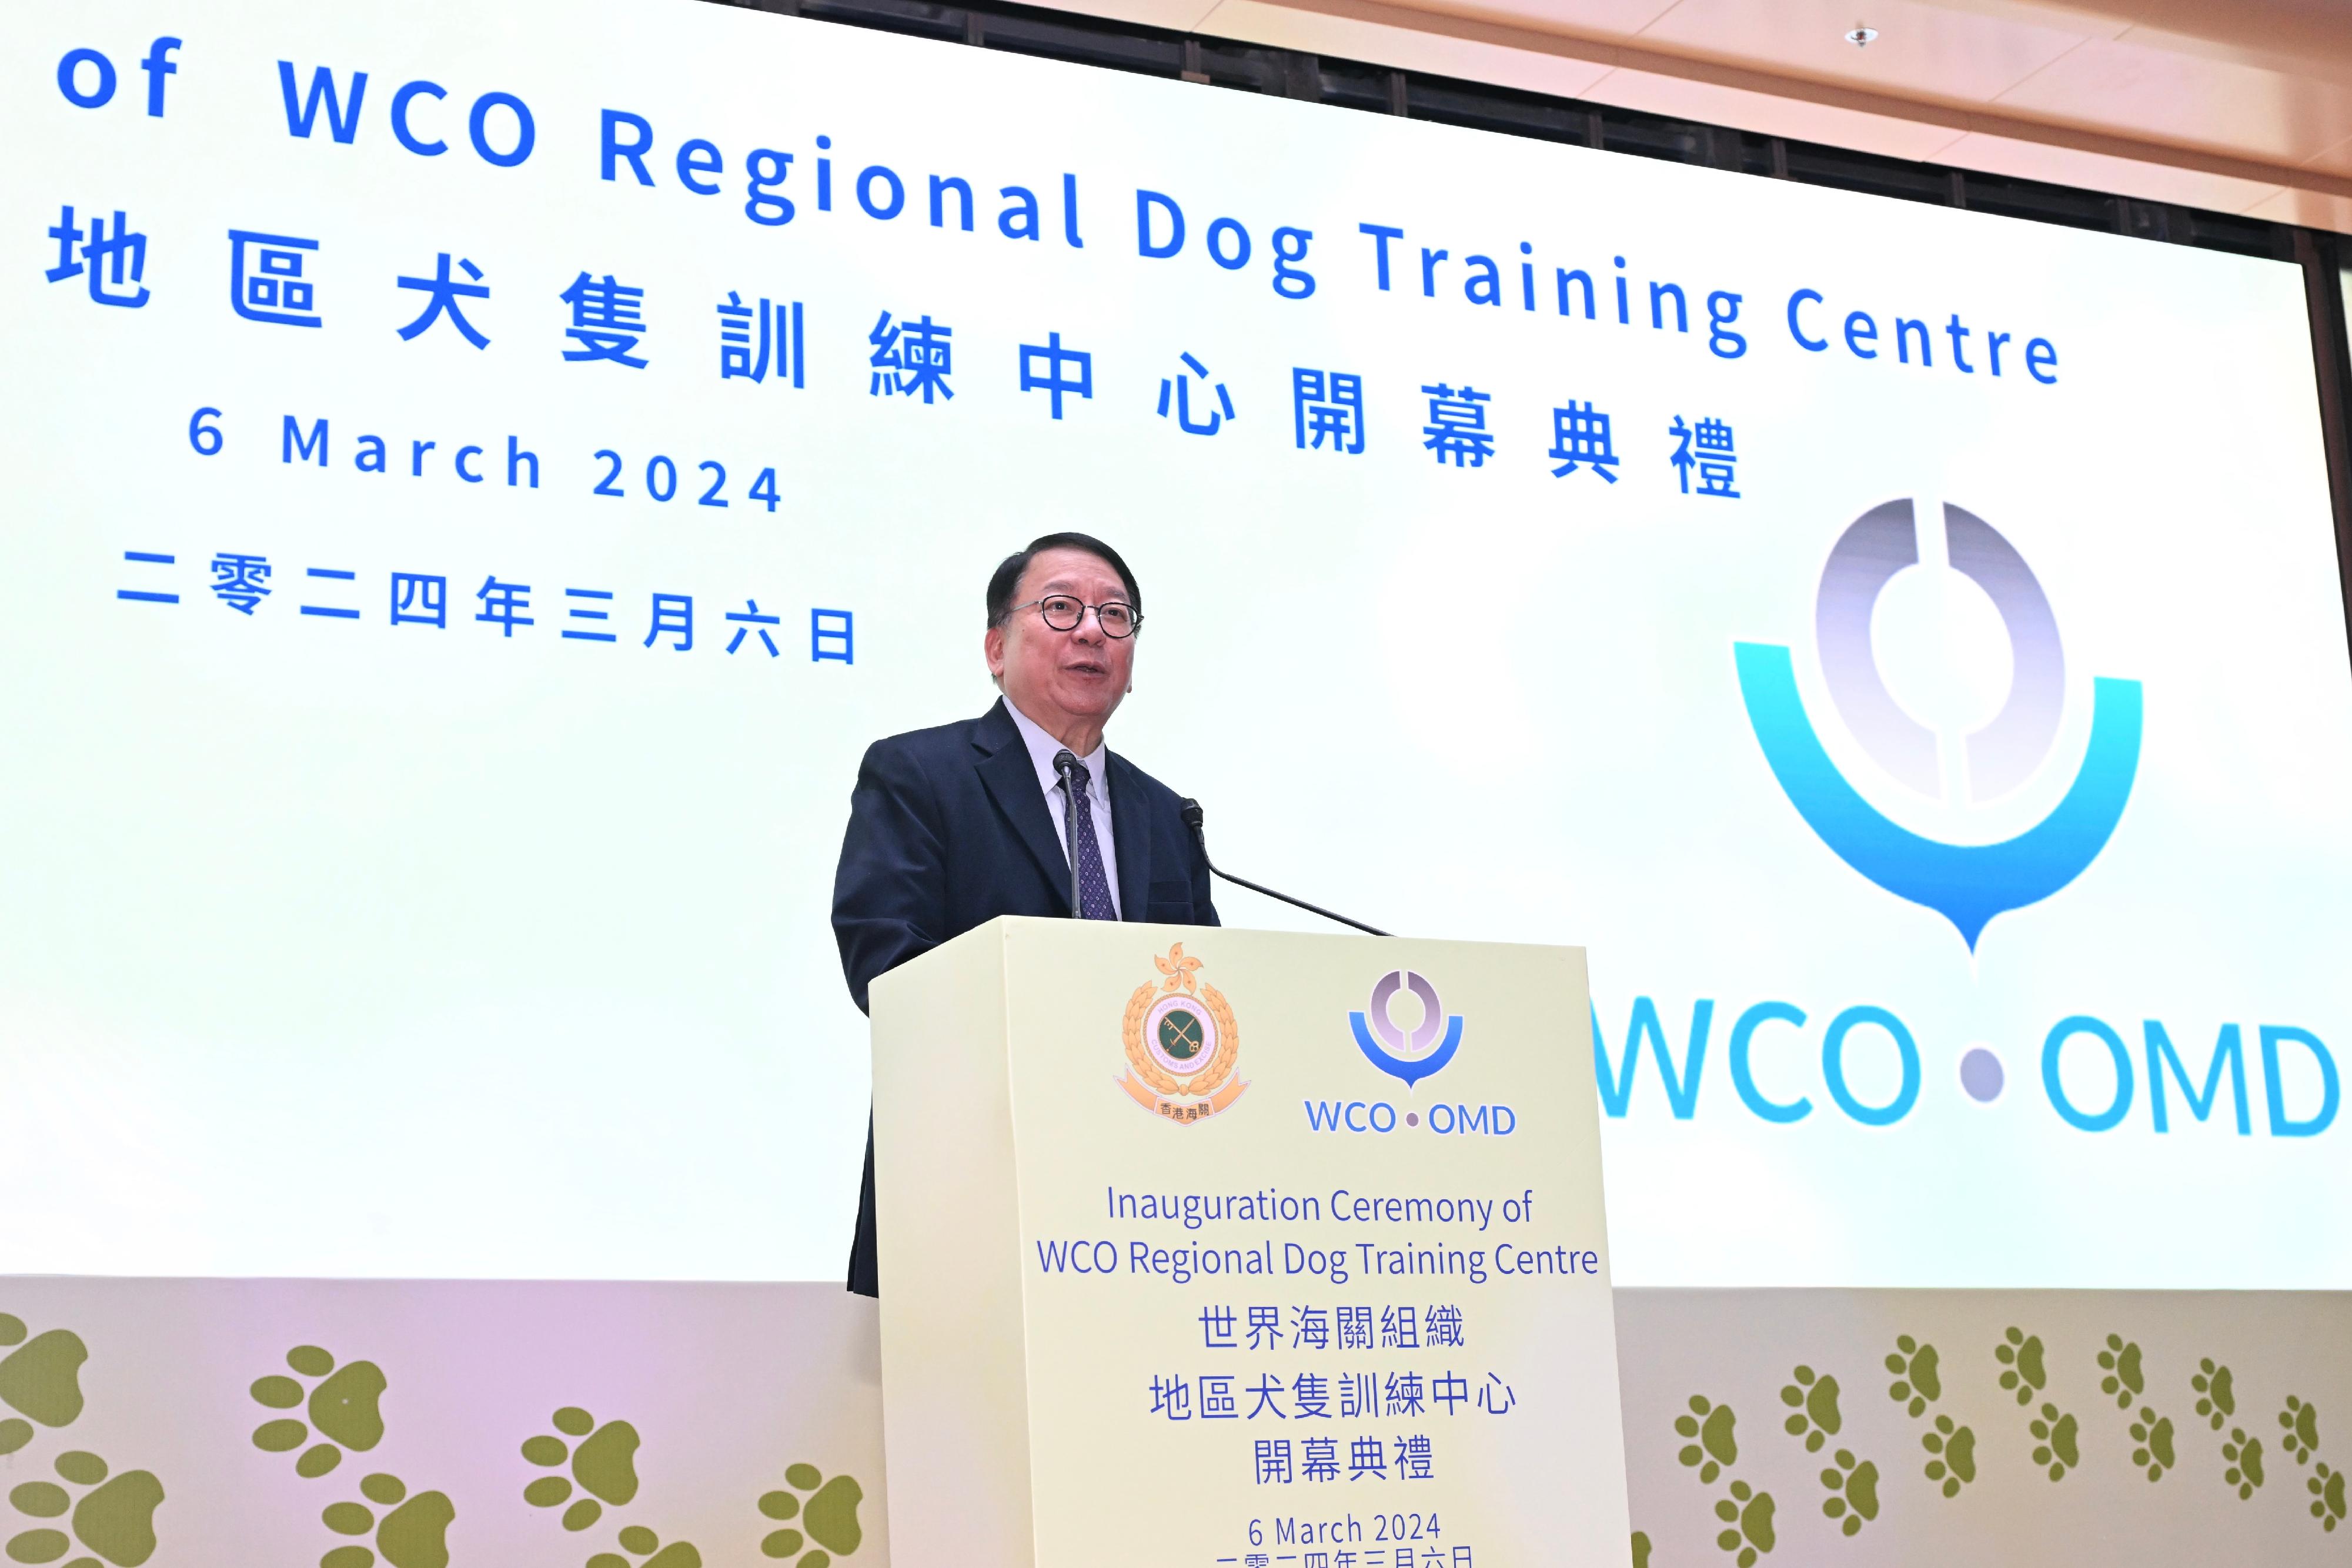 The Chief Secretary for Administration, Mr Chan Kwok-ki, speaks at the Inauguration Ceremony of WCO (World Customs Organization) Regional Dog Training Centre today (March 6).
